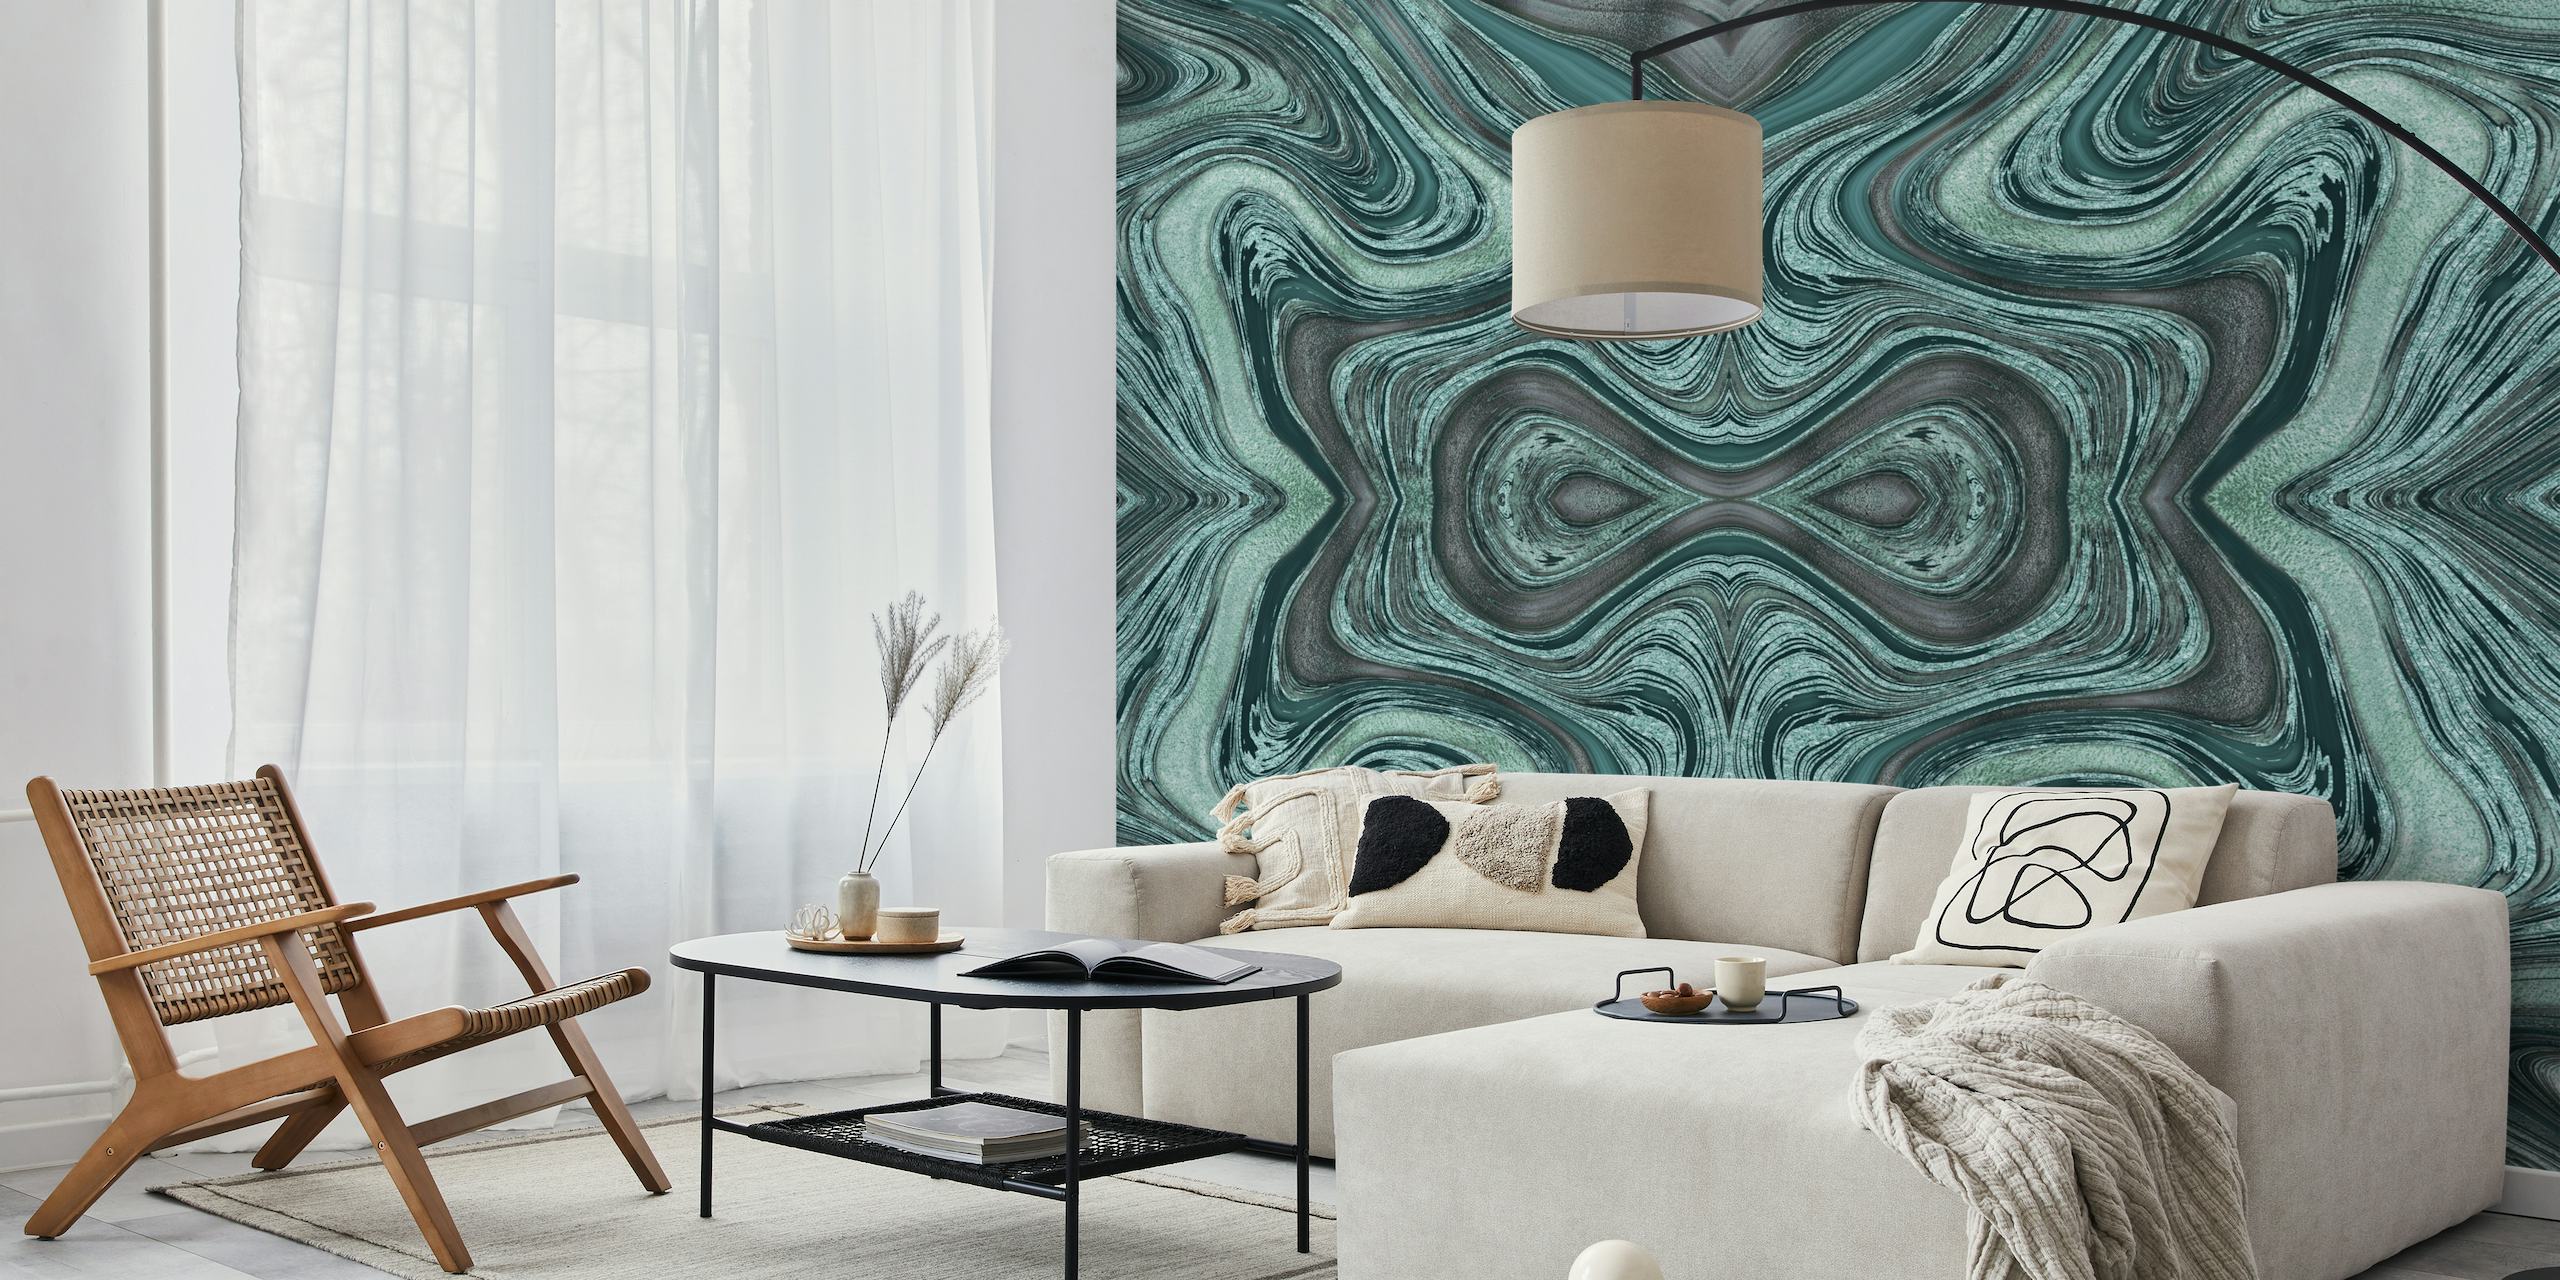 Abstract Glamour River Turquoise wall mural with soothing wavy patterns in shades of turquoise, gray, and white.